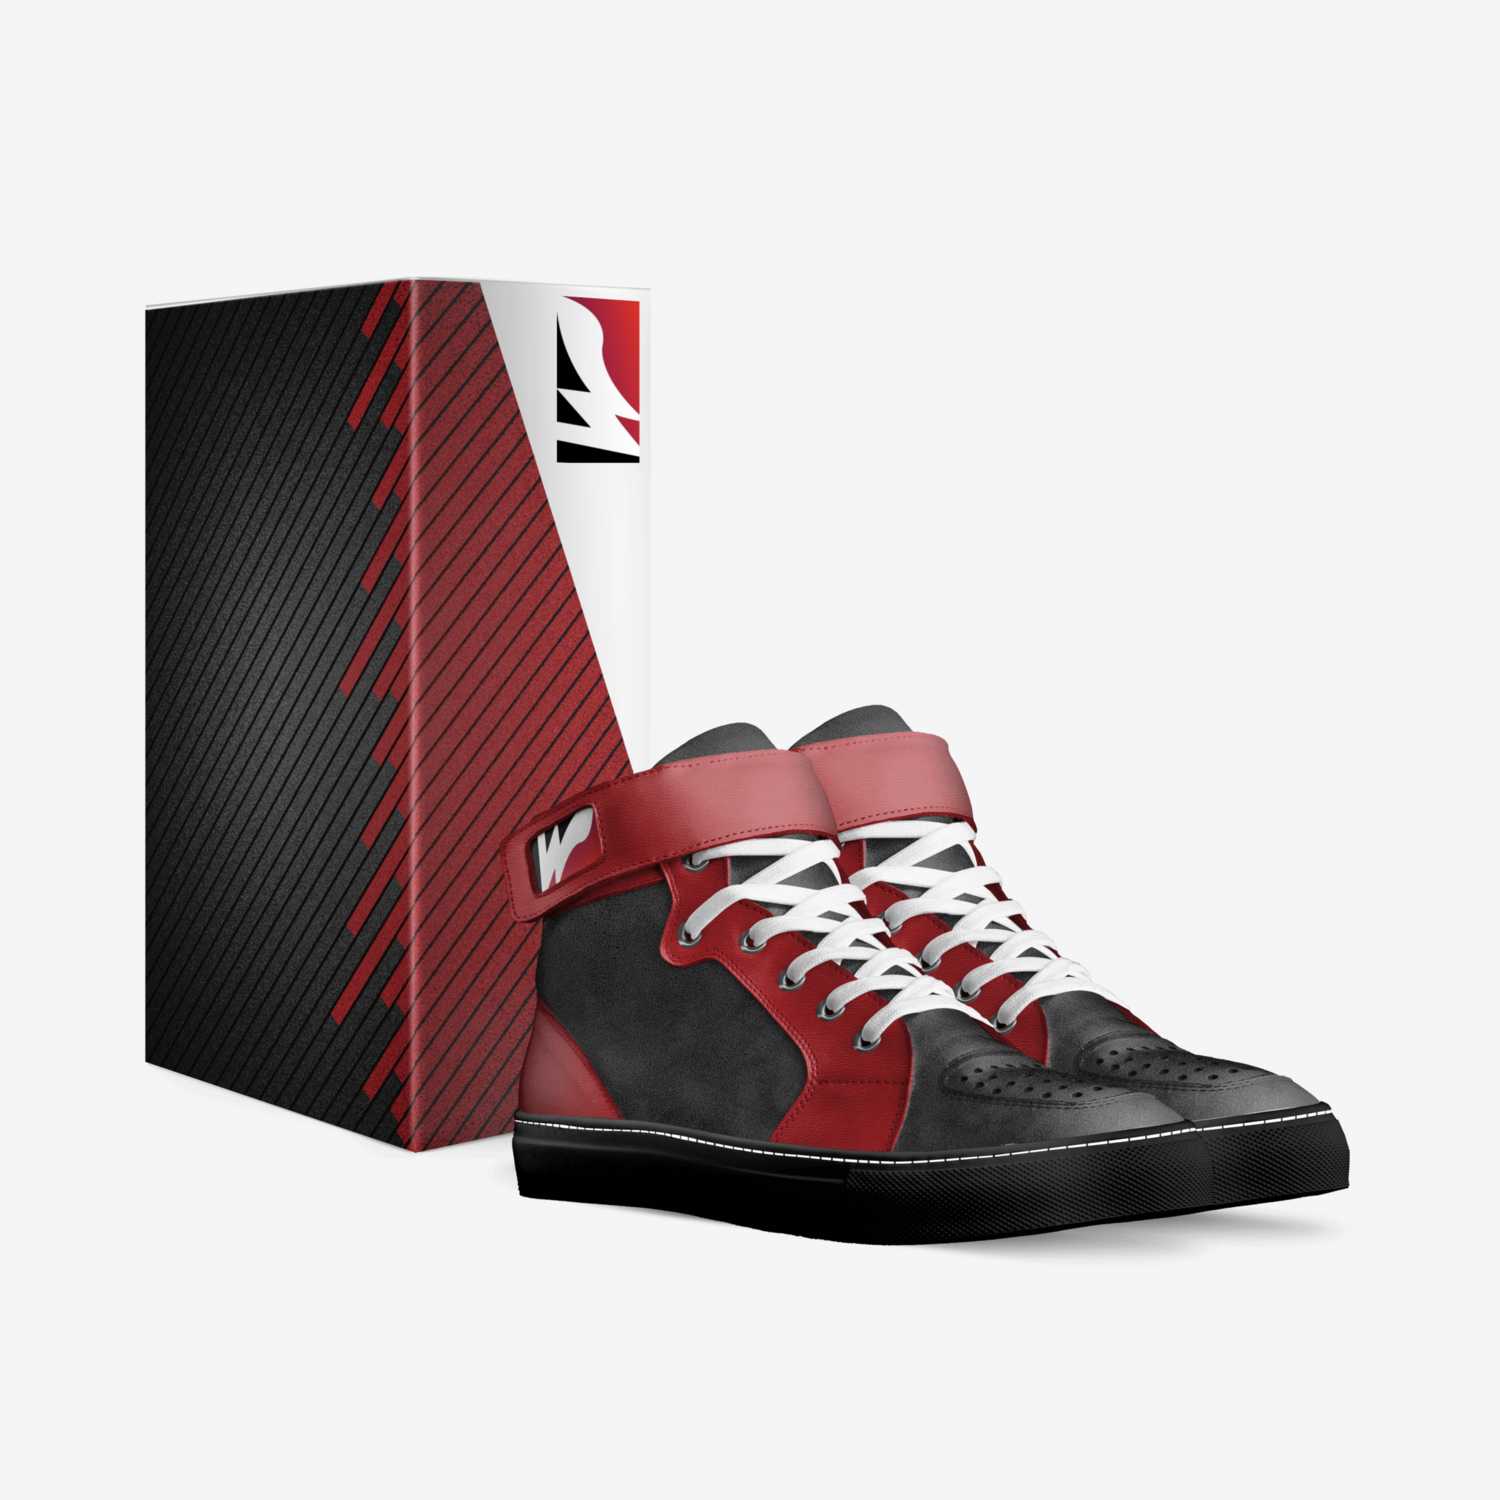 ALPHA PROTO custom made in Italy shoes by Prowings Apparel | Box view